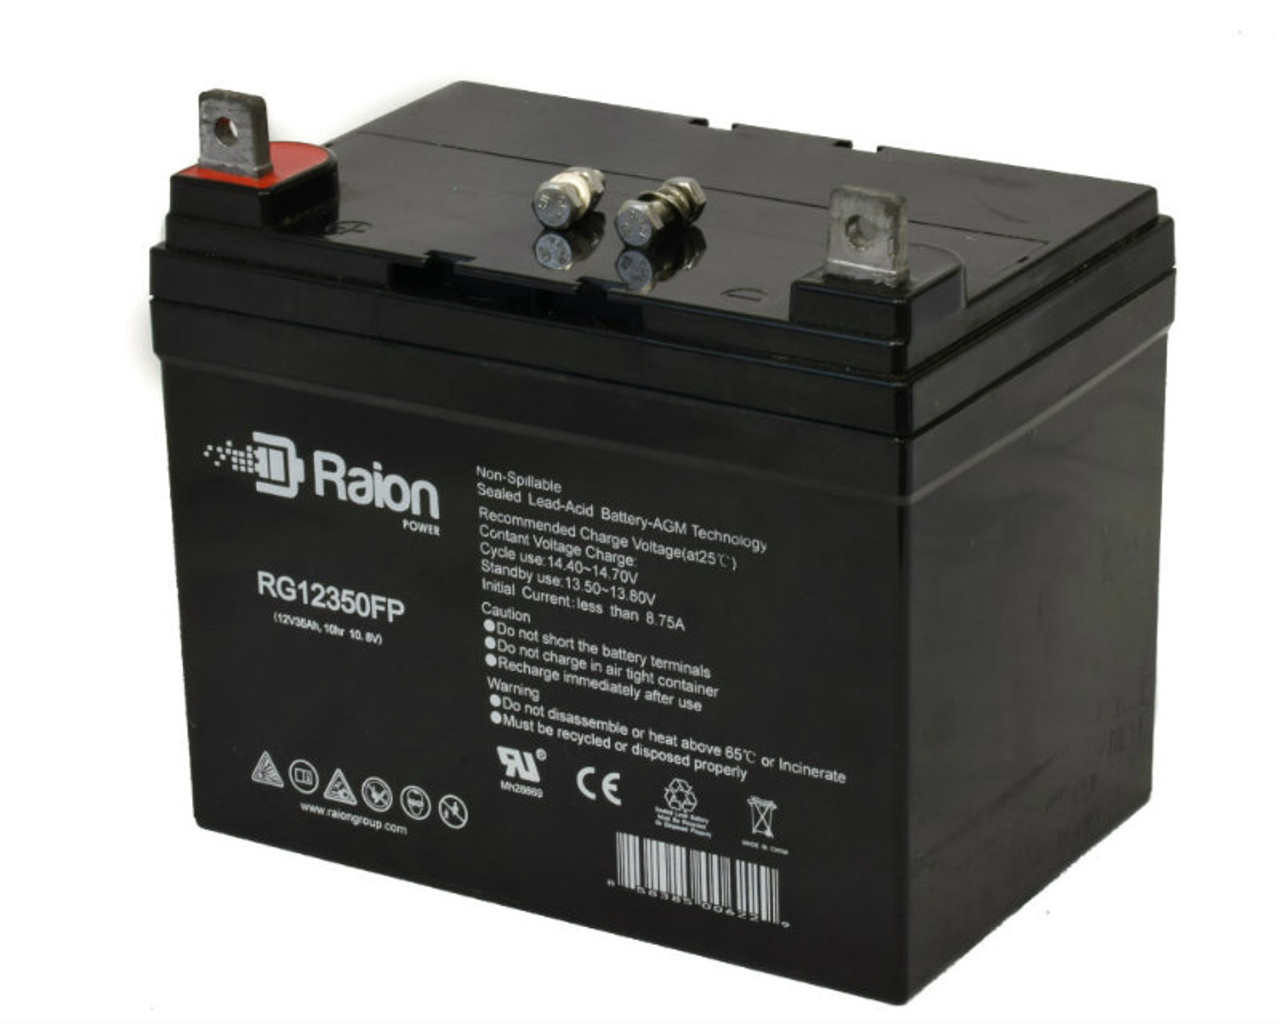 Raion Power Replacement 12V 35Ah RG12350FP Battery for Speedex Tractor S-17